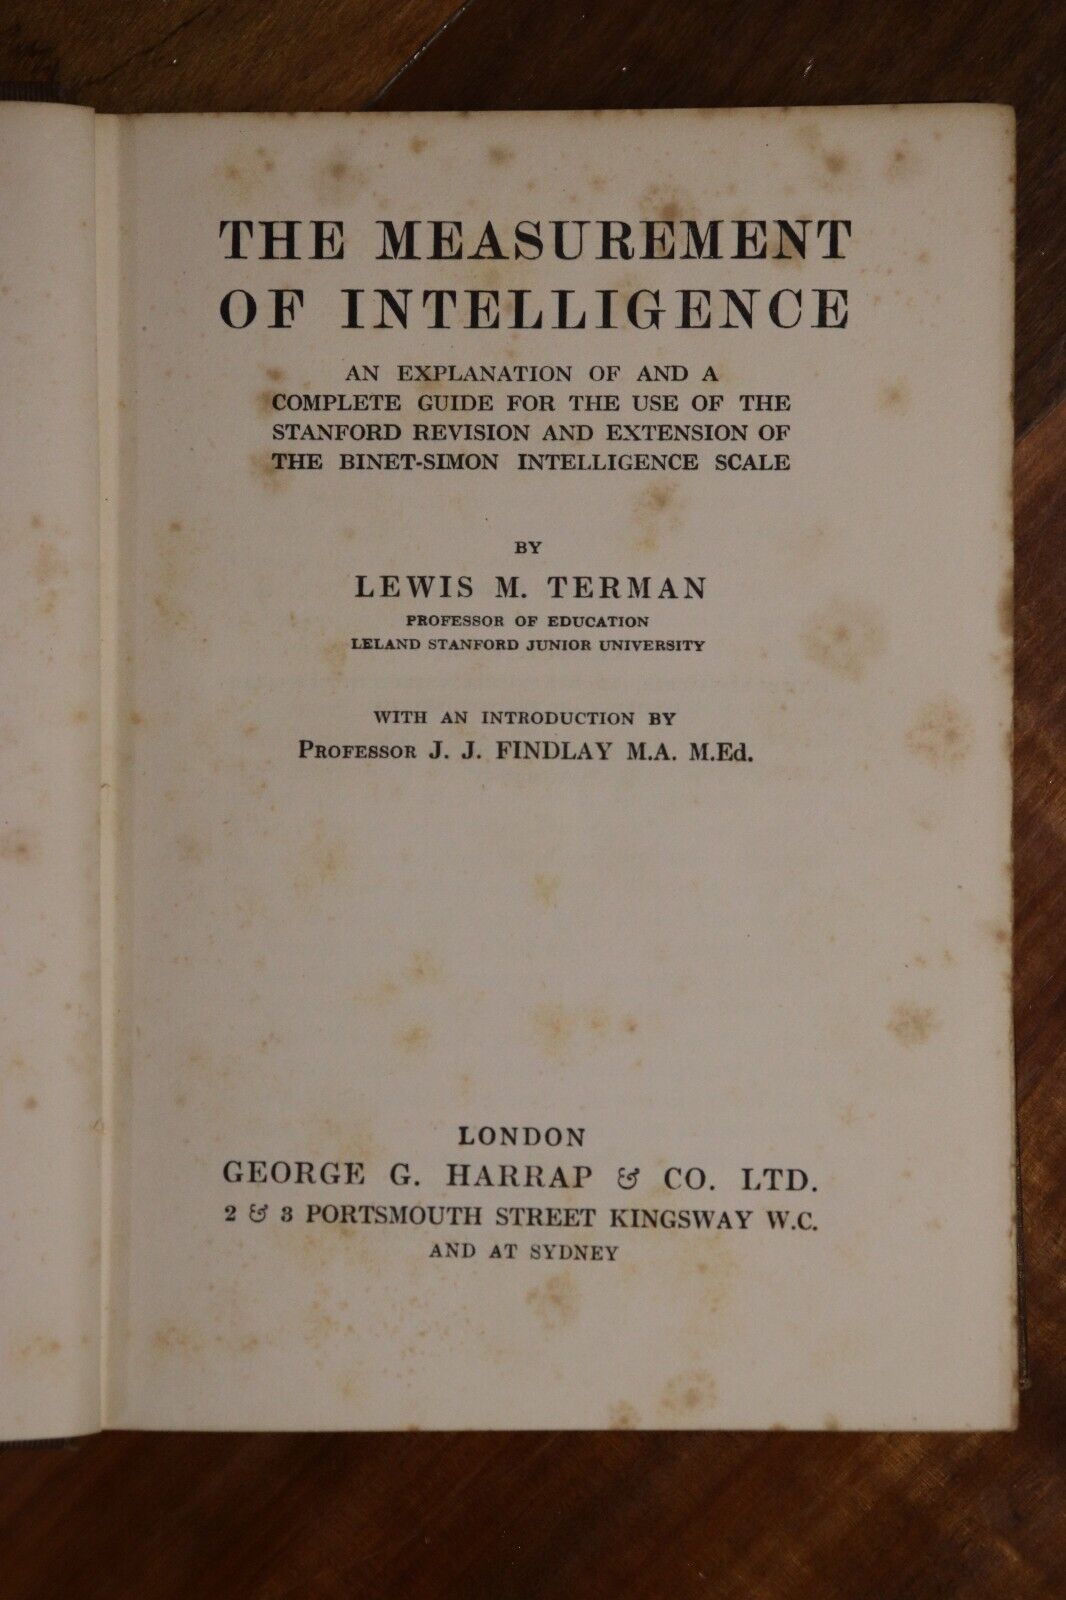 The Measurement Of Intelligence by LM Terman - 1921 - Antique Psychology Book